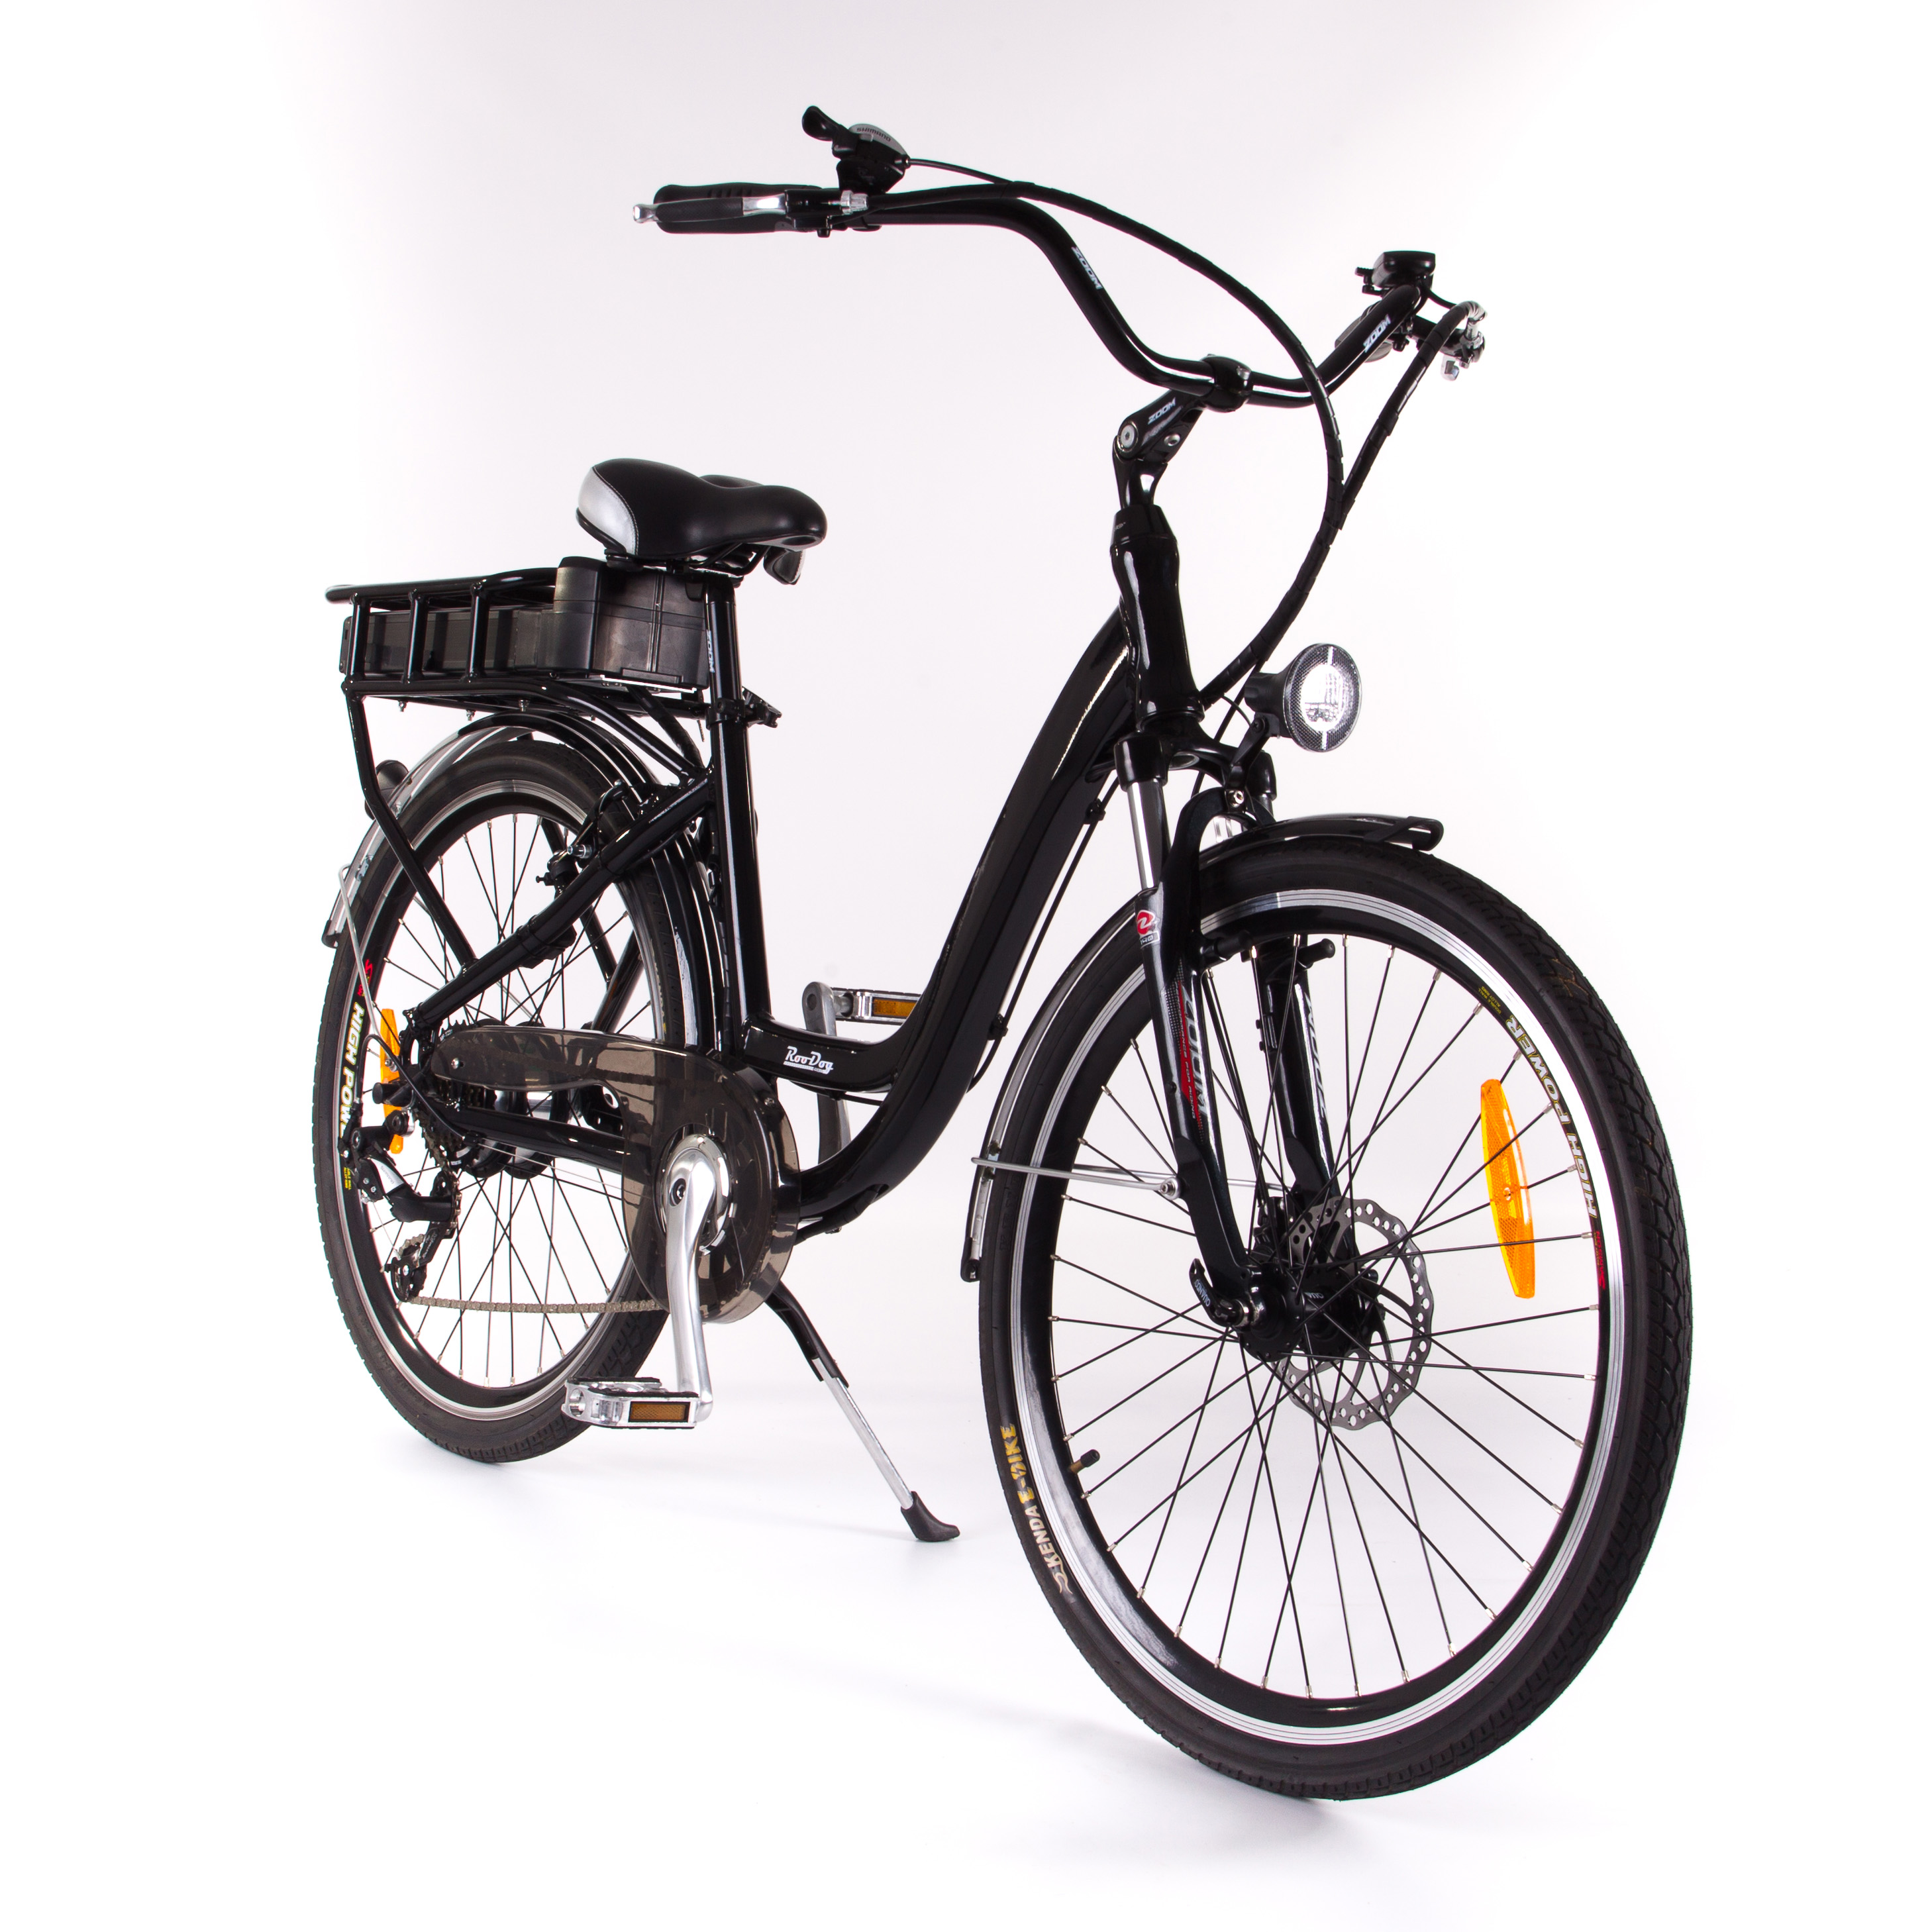 RooDog Chic electric bike in glossy black side view